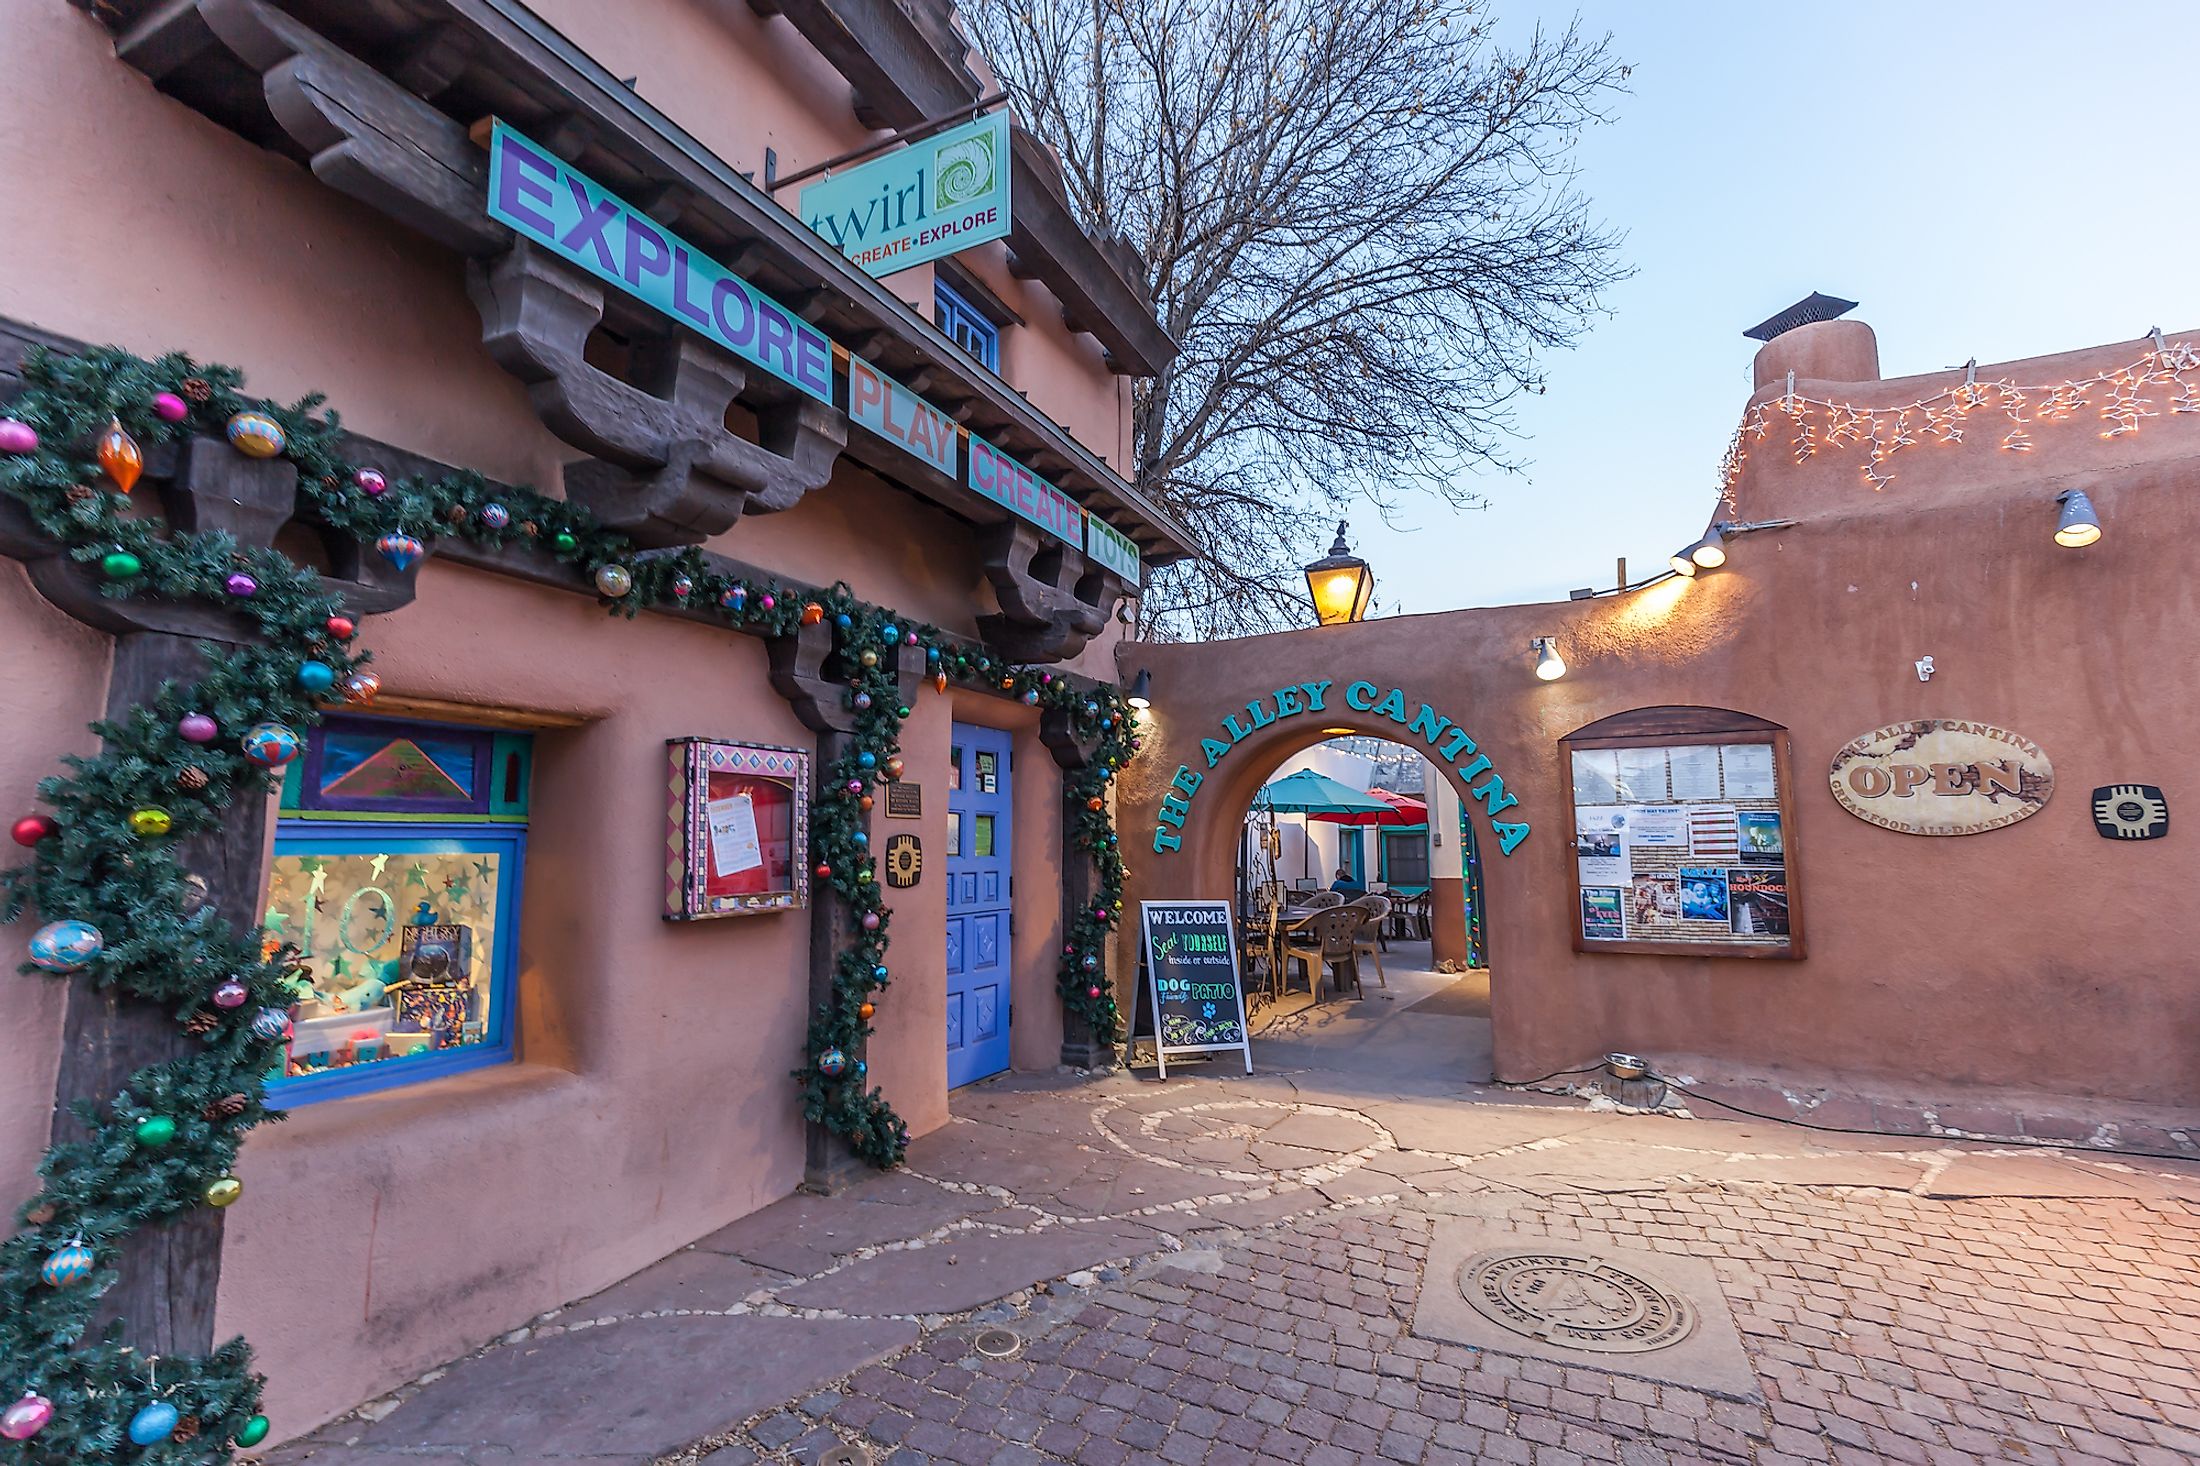 The Alley Cantina on the plaza in the heart of historic Taos, New Mexico. Editorial credit: JHVEPhoto / Shutterstock.com